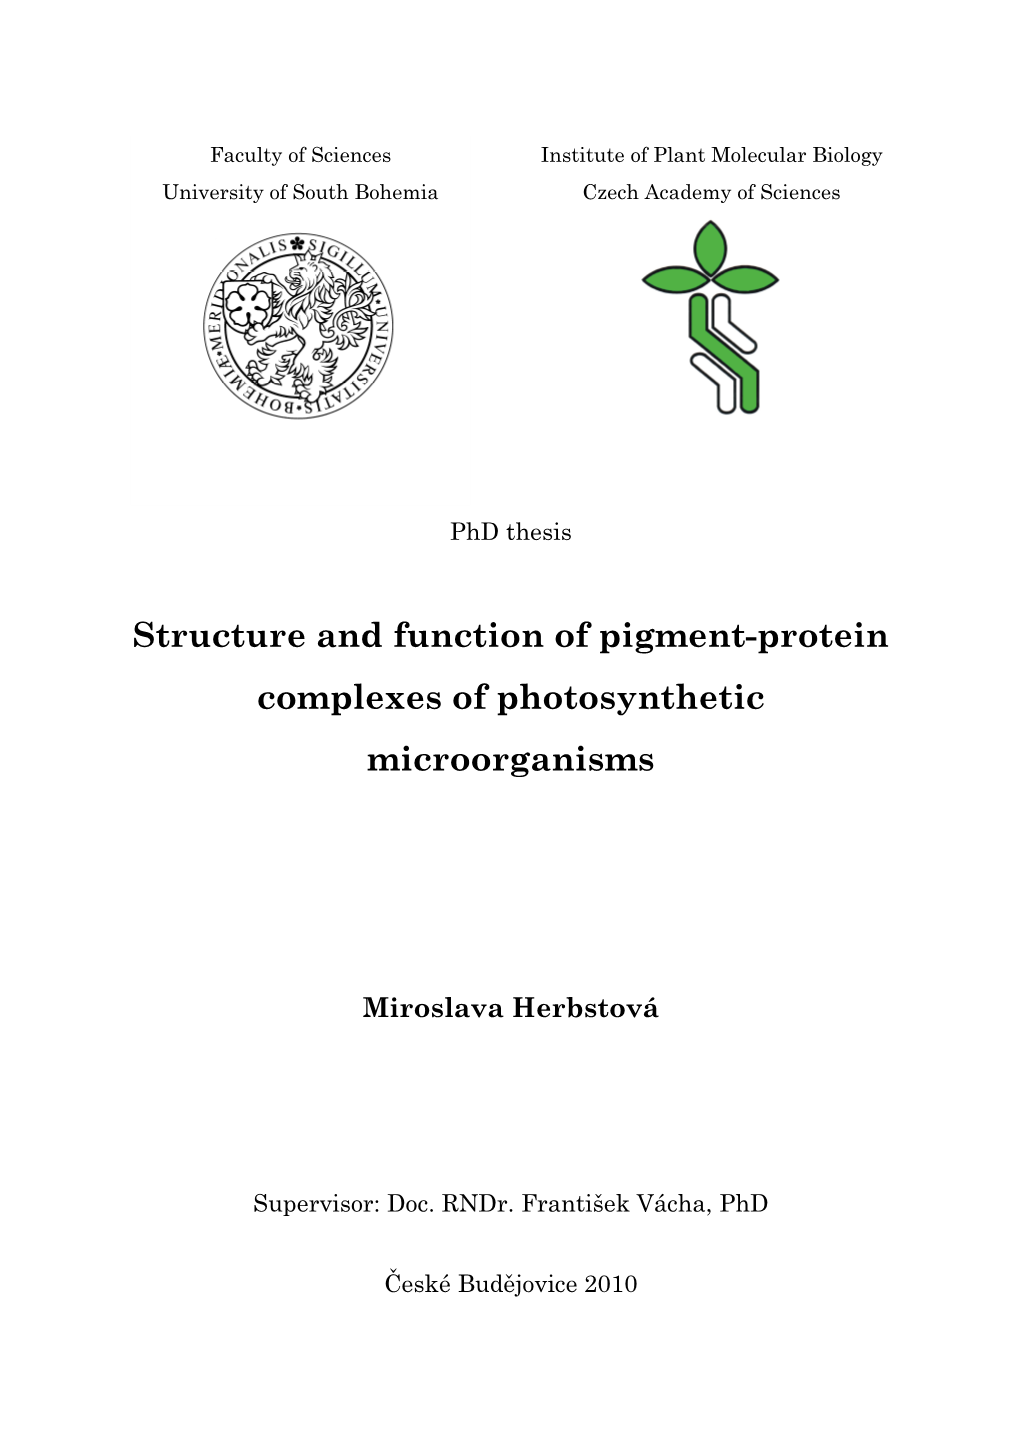 Structure and Function of Pigment-Protein Complexes of Photosynthetic Microorganisms